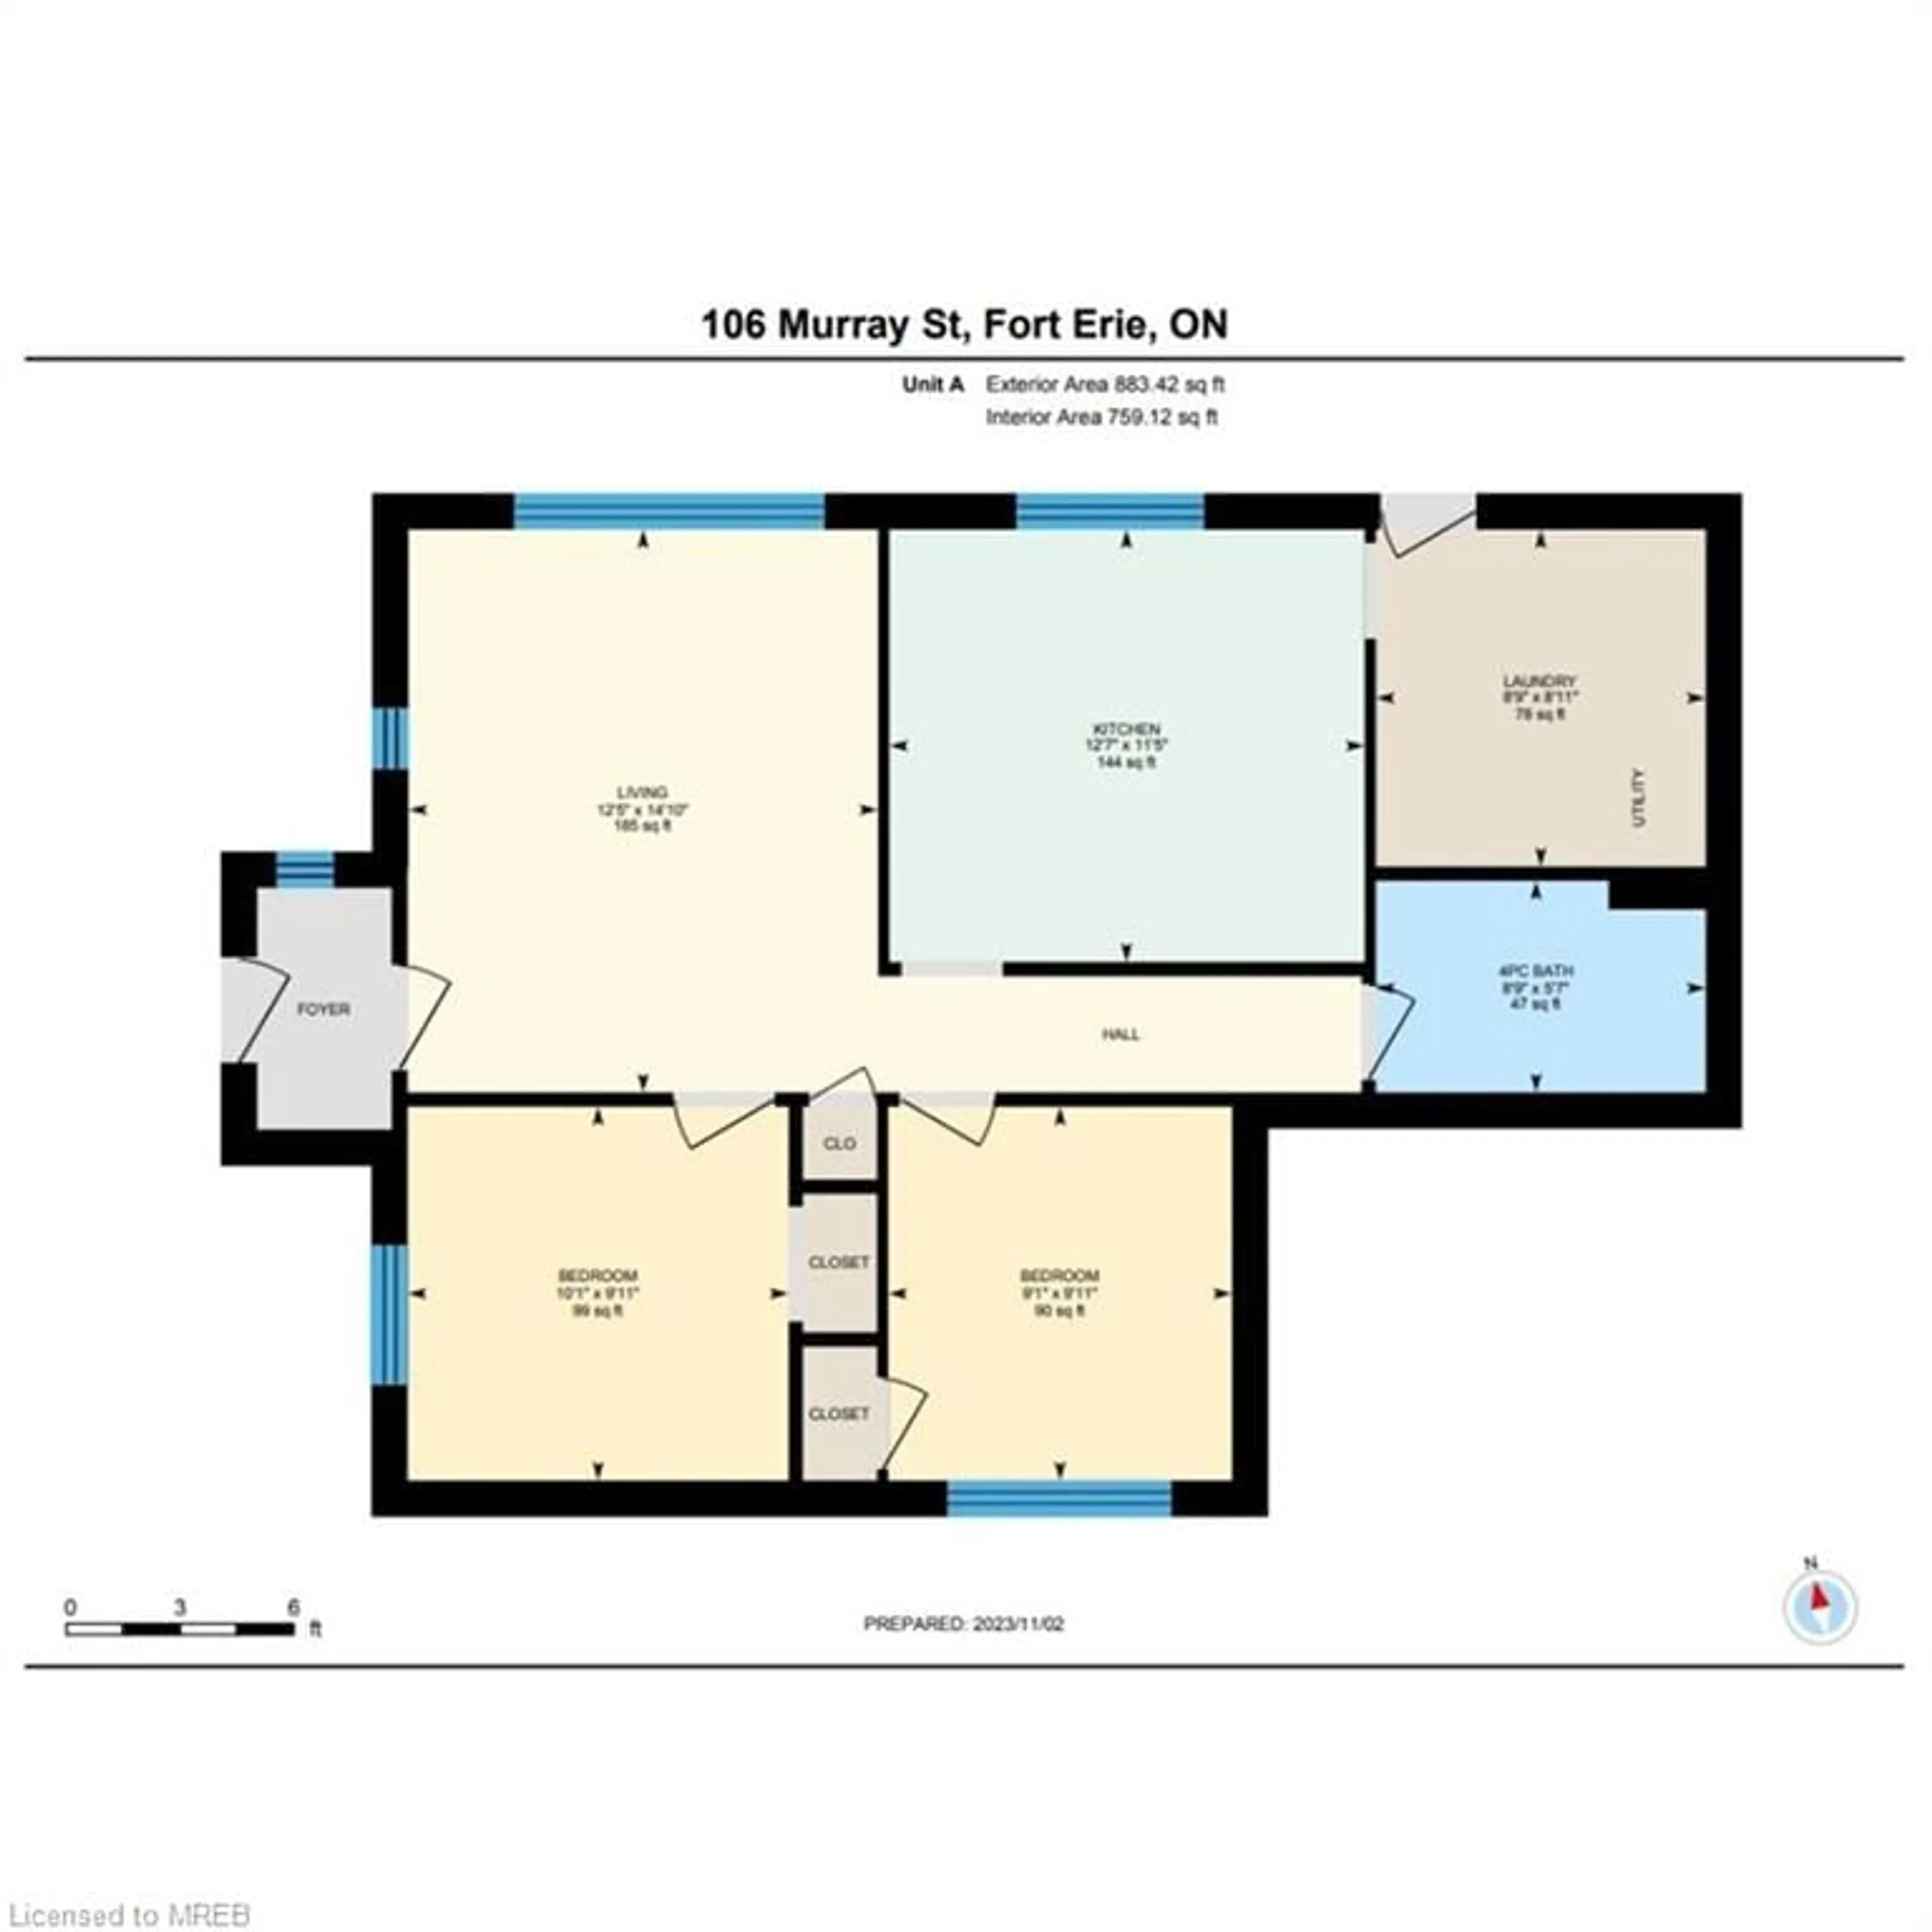 Floor plan for 106 Murray St, Fort Erie Ontario L2A 2A8